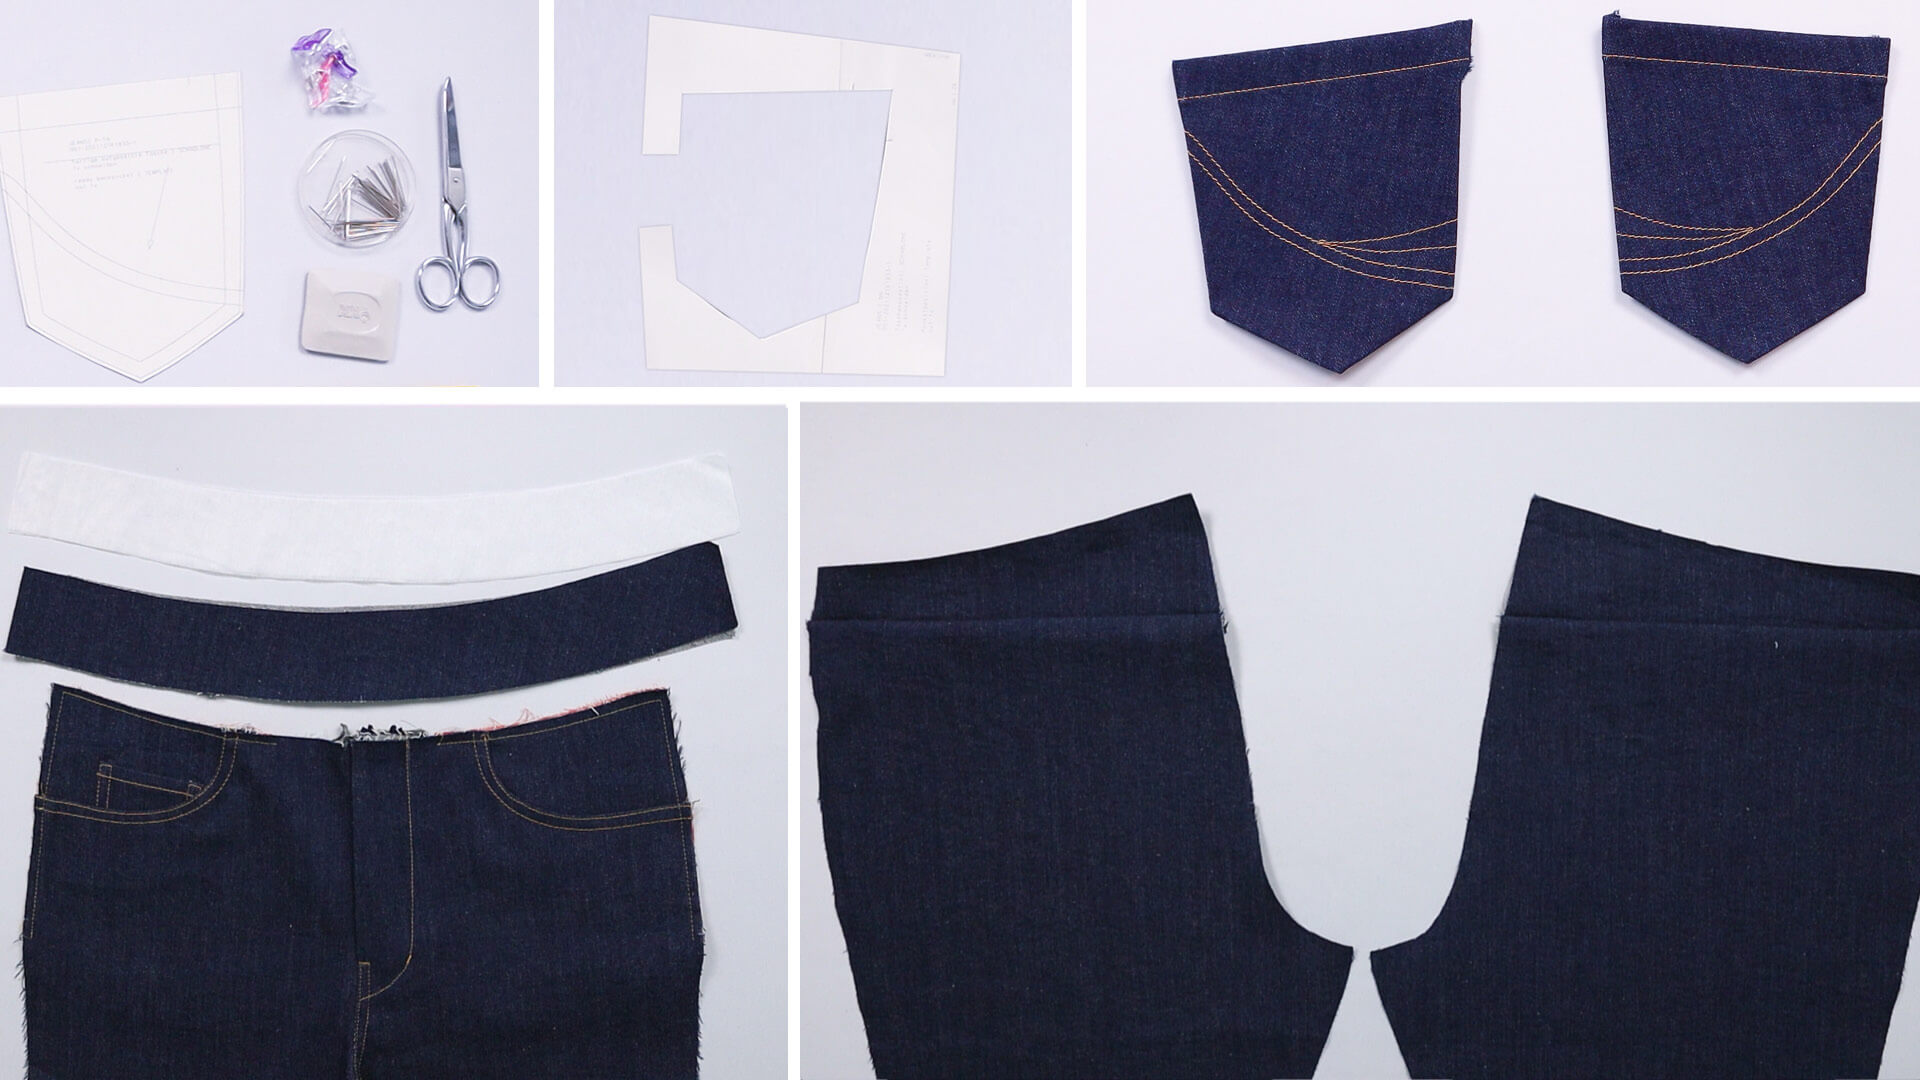 smartPATTERN sewing instructions for preparing a pair of jeans to try on - required pattern pieces and materials